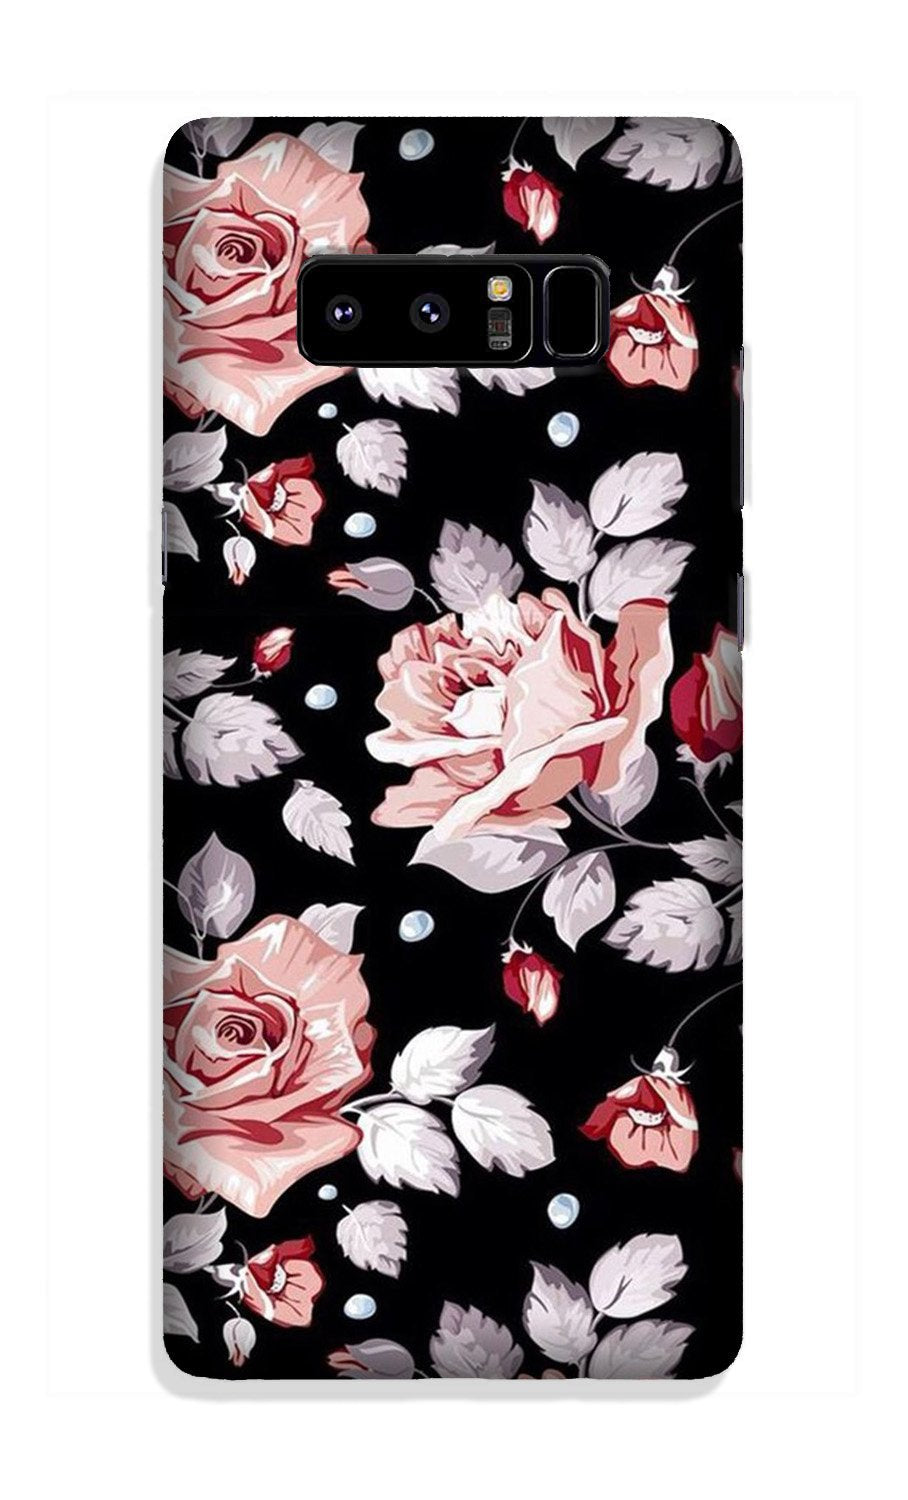 Pink rose Case for Galaxy Note 8